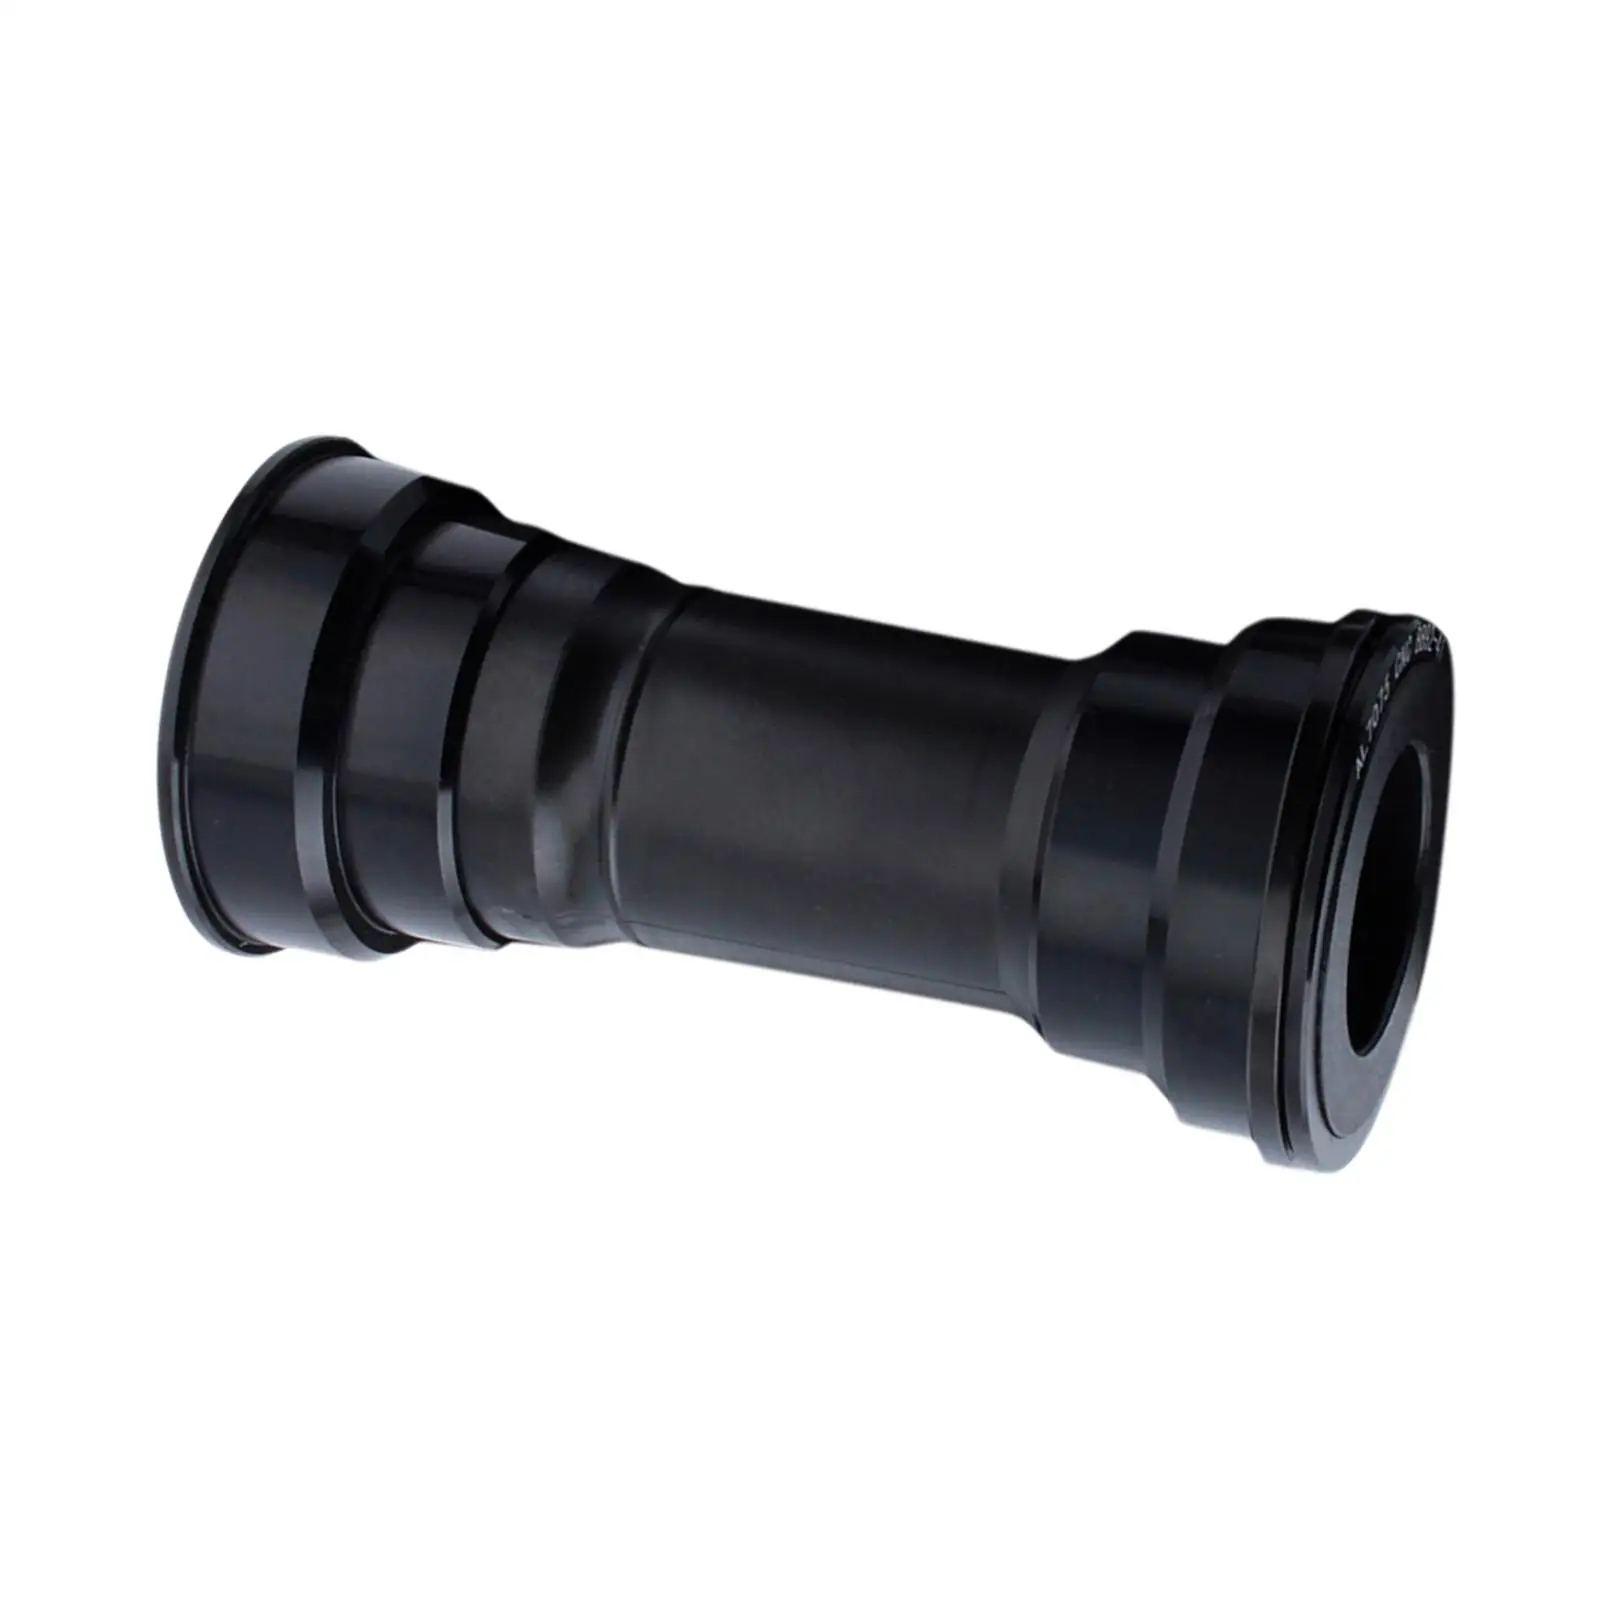 Bottom Bracket BB90-92mm Press Fit 41mm Cup for Mountain Bike Road Bicycle